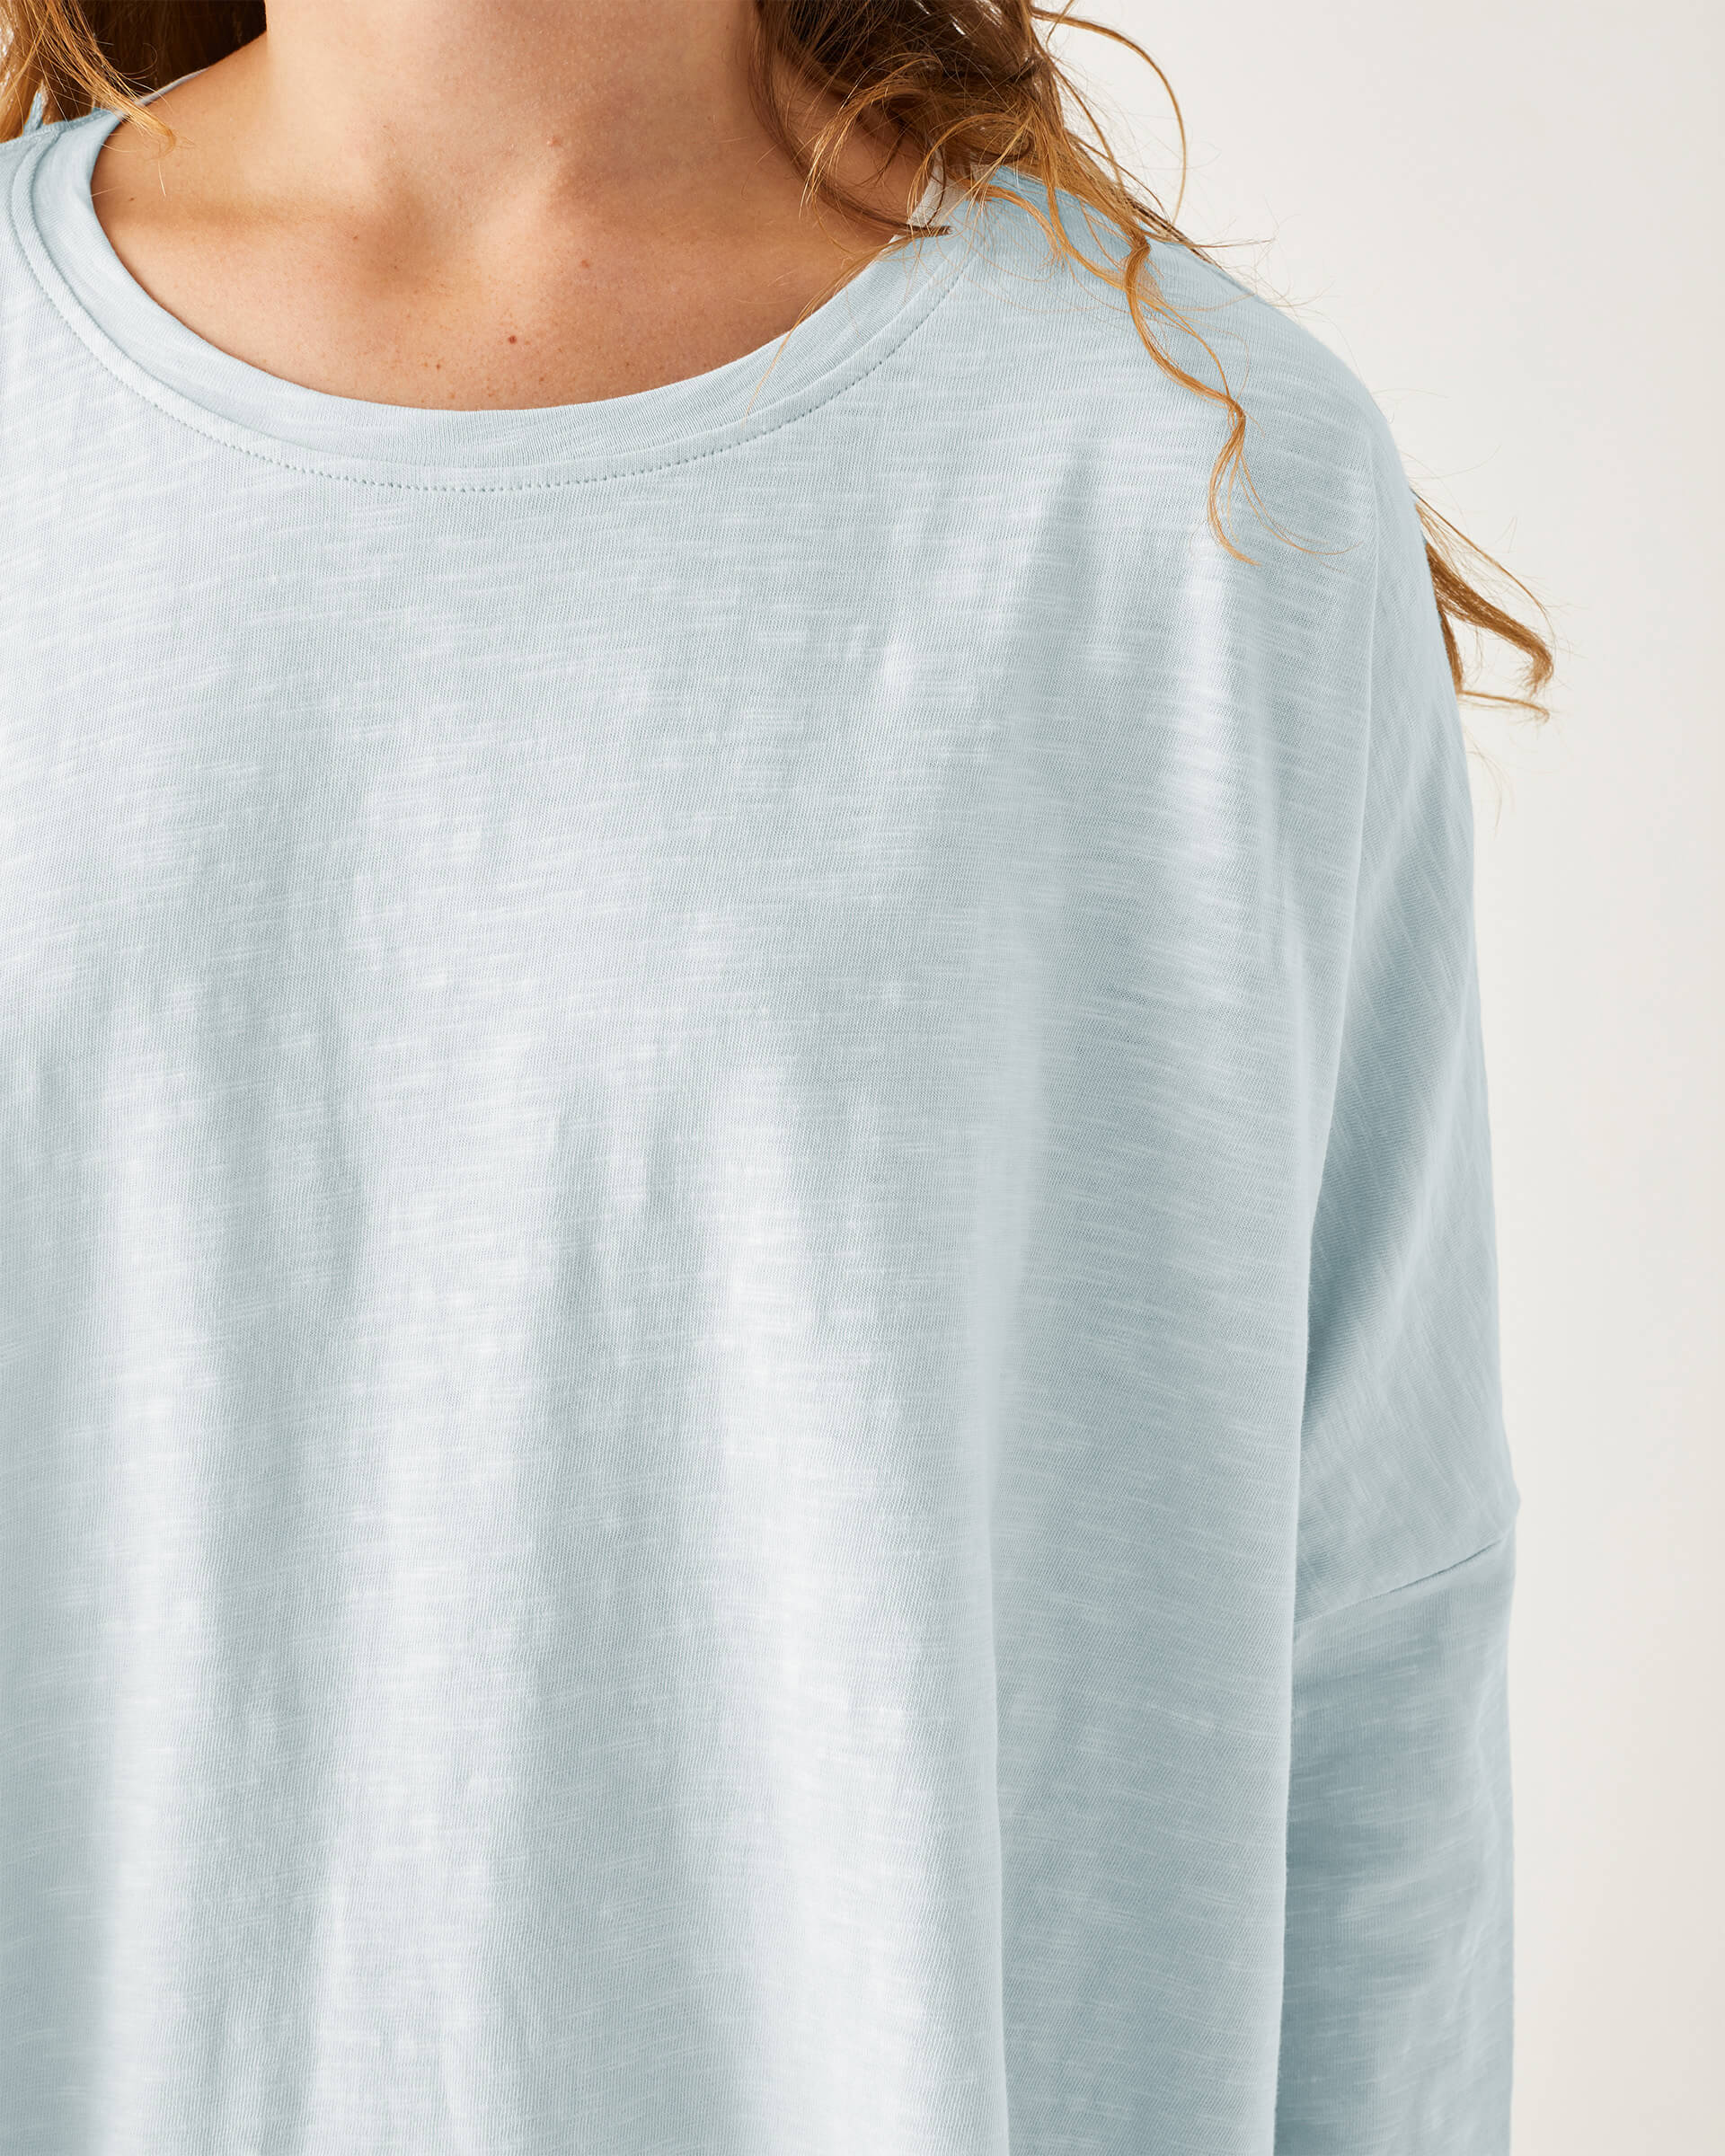 close up of female wearing light blue cotton tee shirt with crew neck on white background